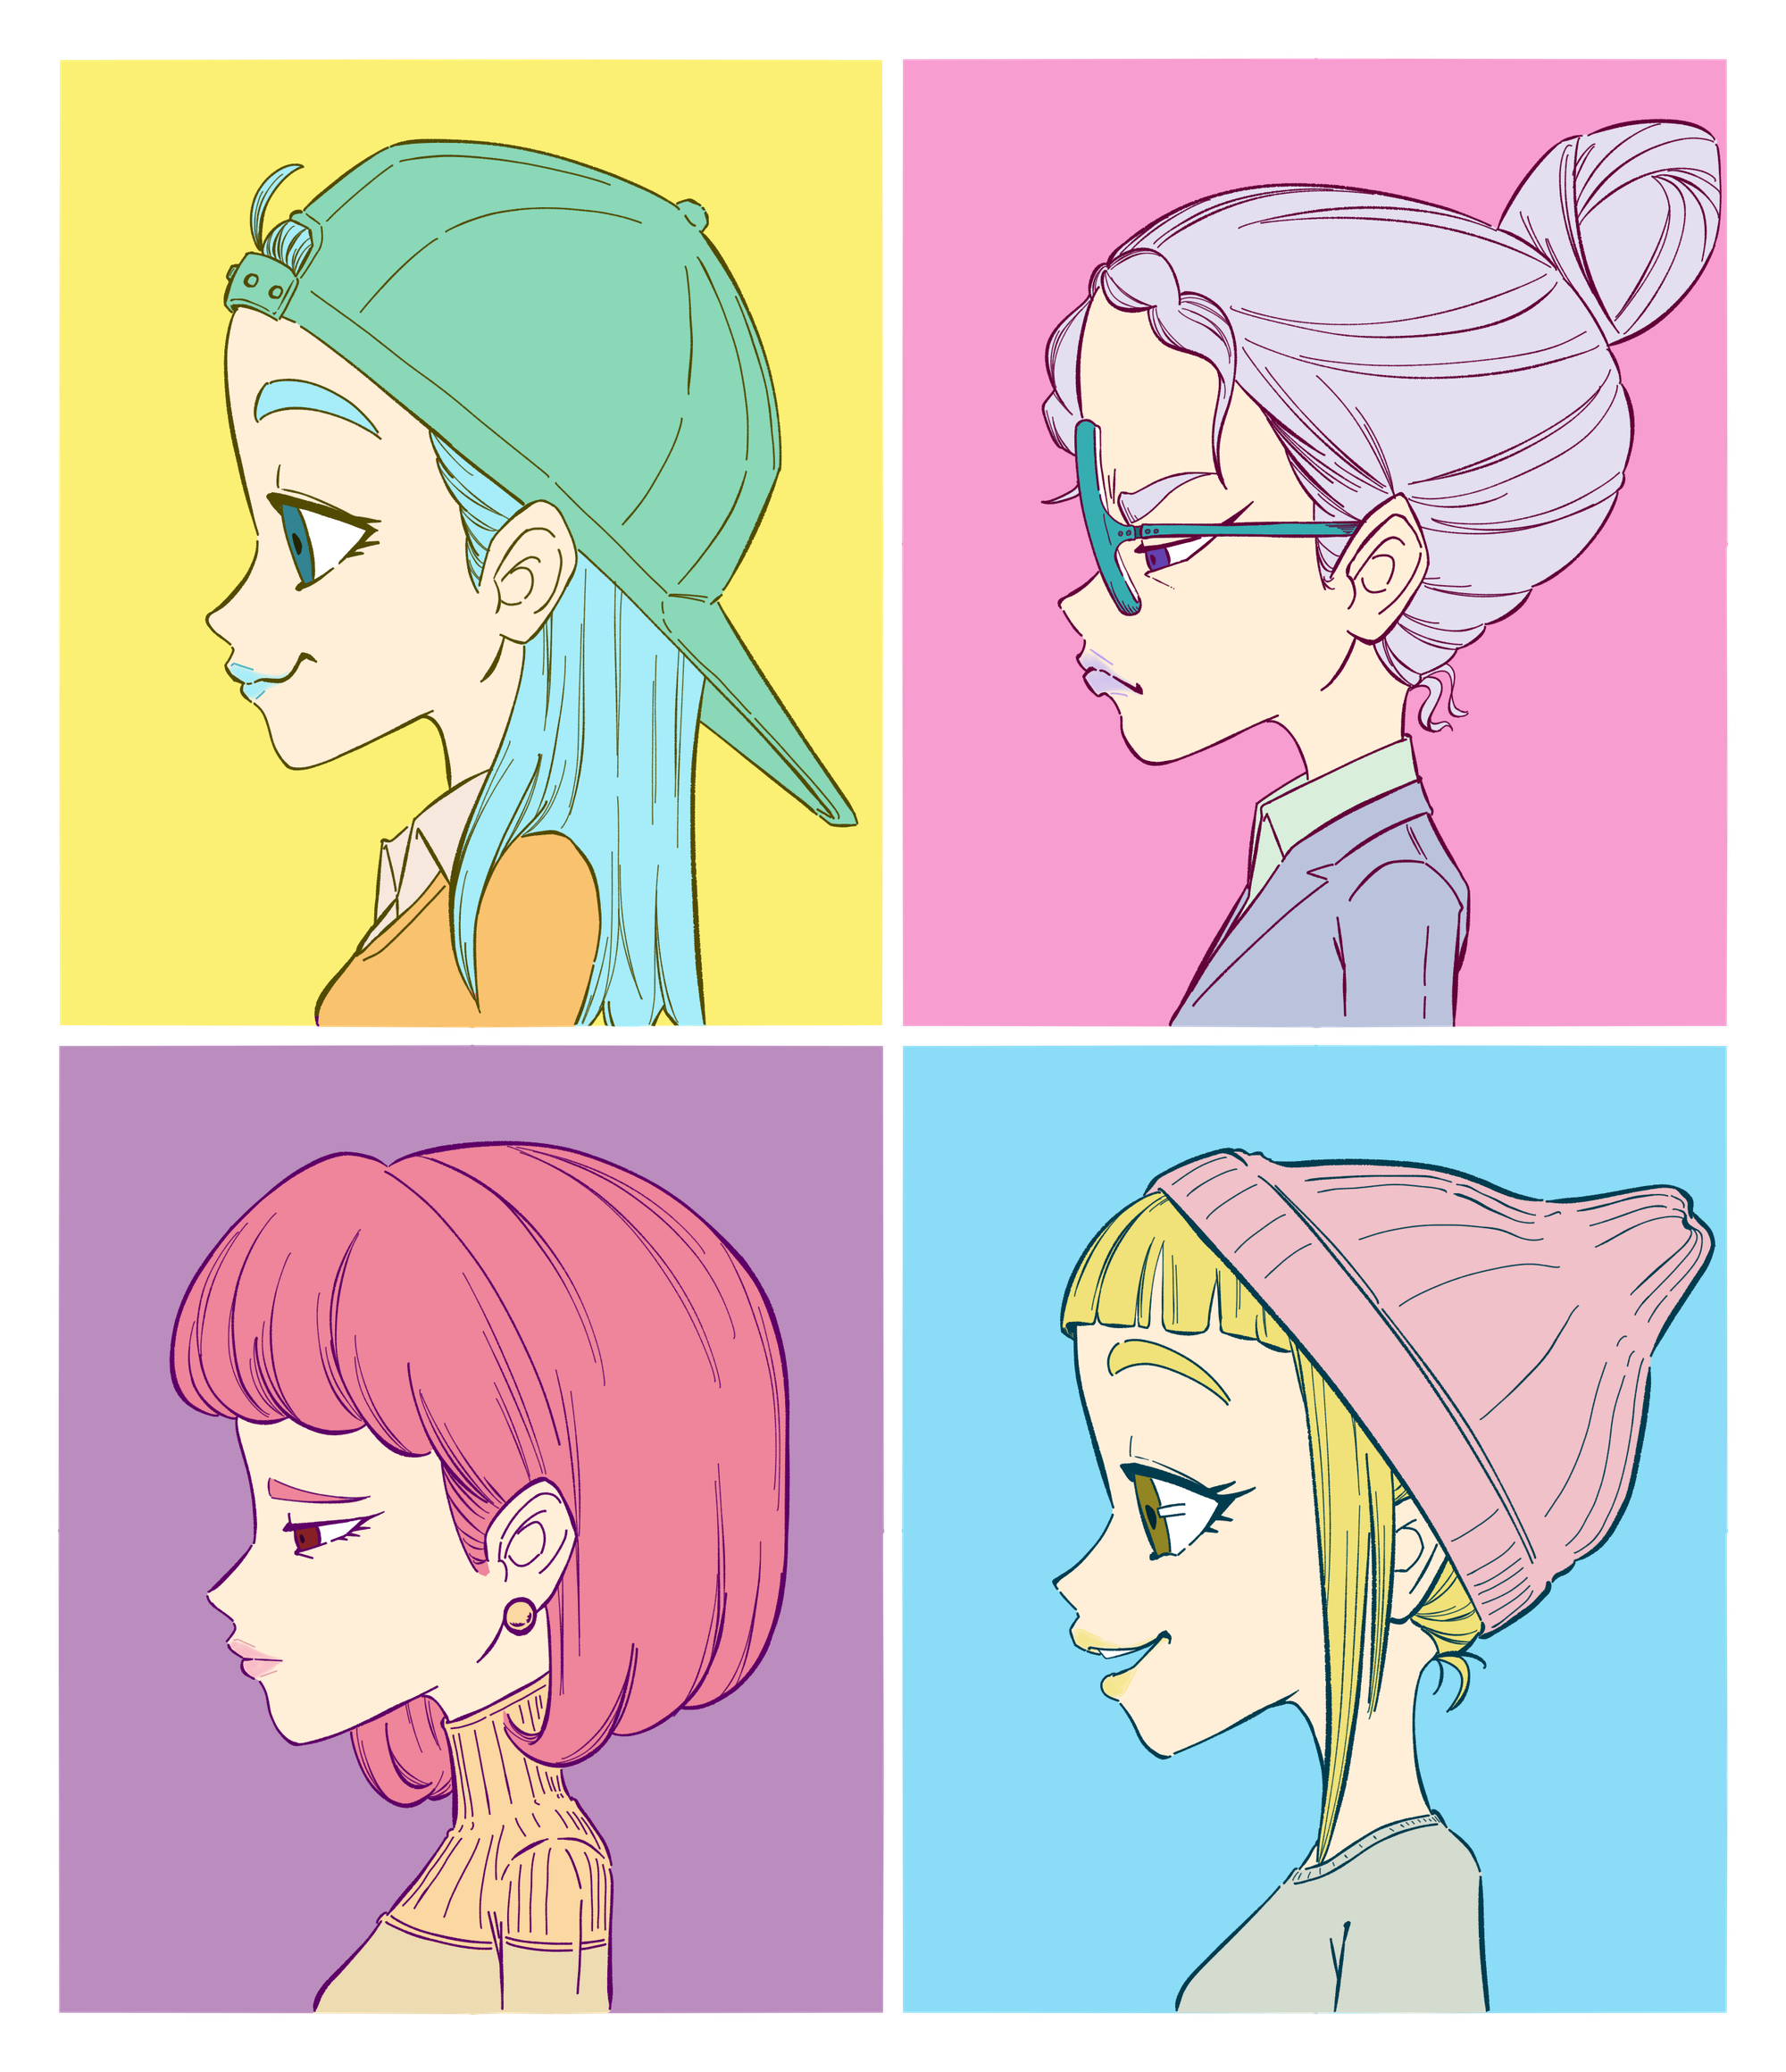 The girls in profile